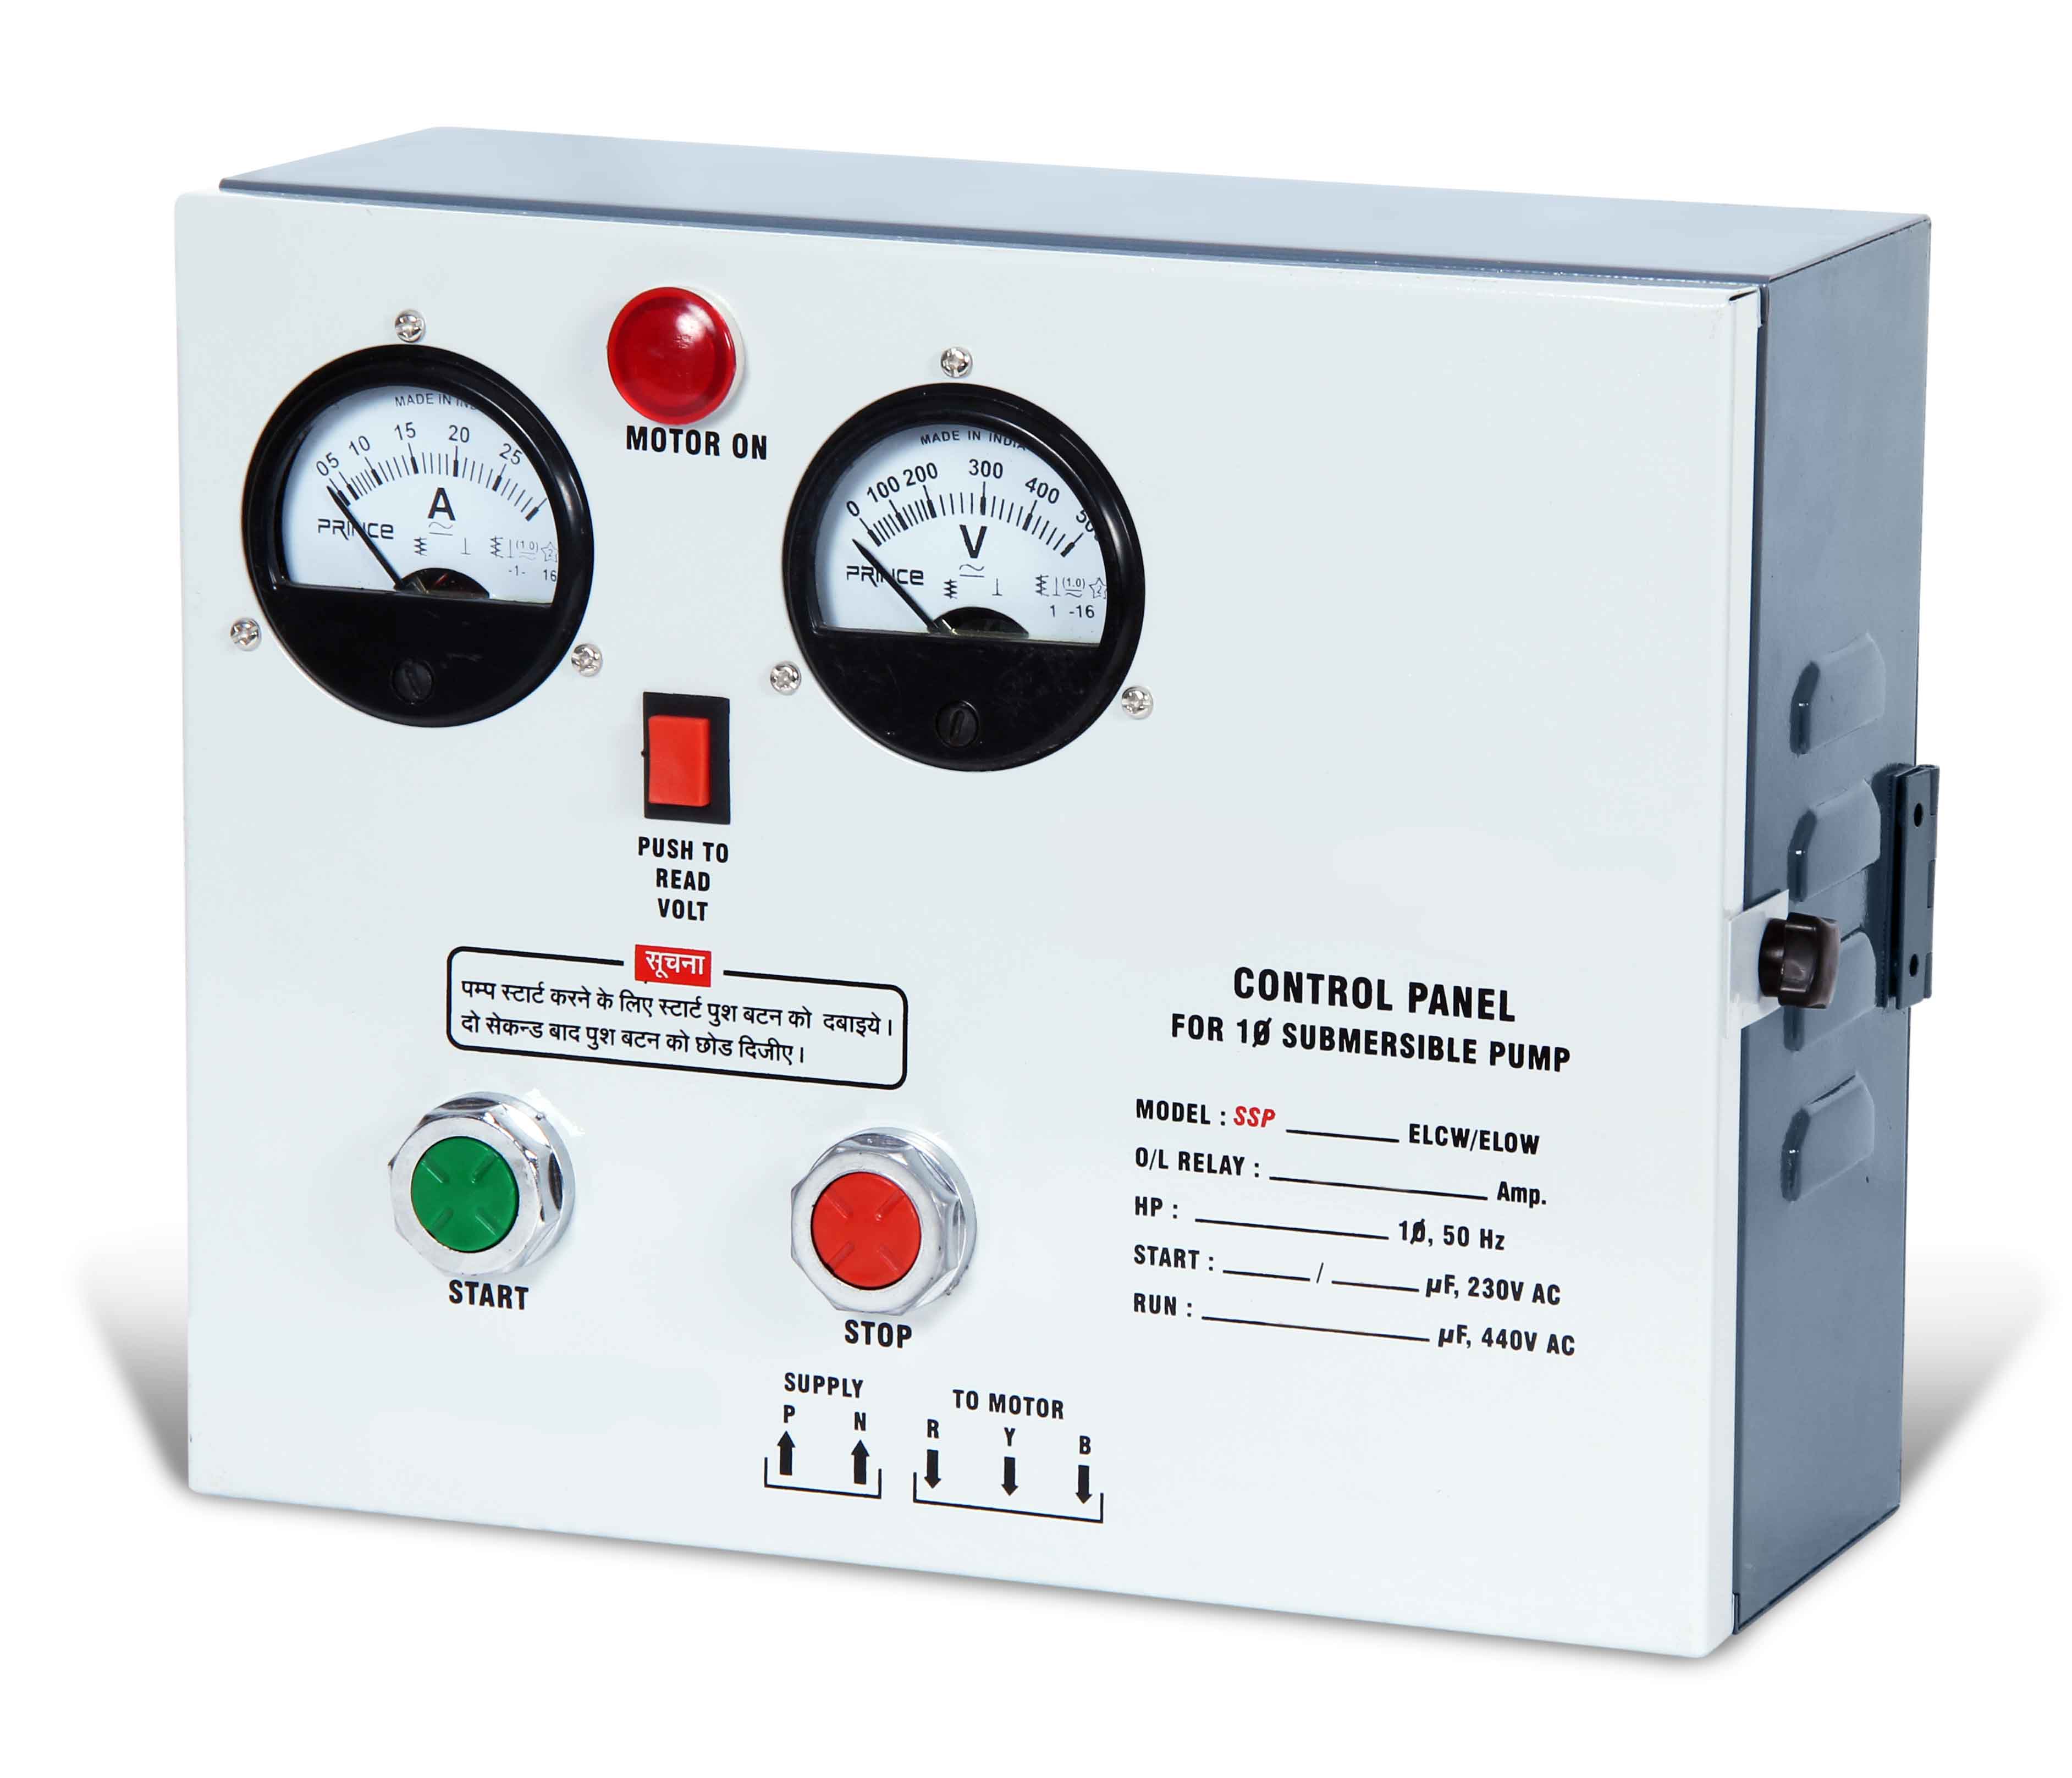 ELCW ECO Single phase motor starter suitable for 3 HP submersible motor with overload protections by bi metallic relay